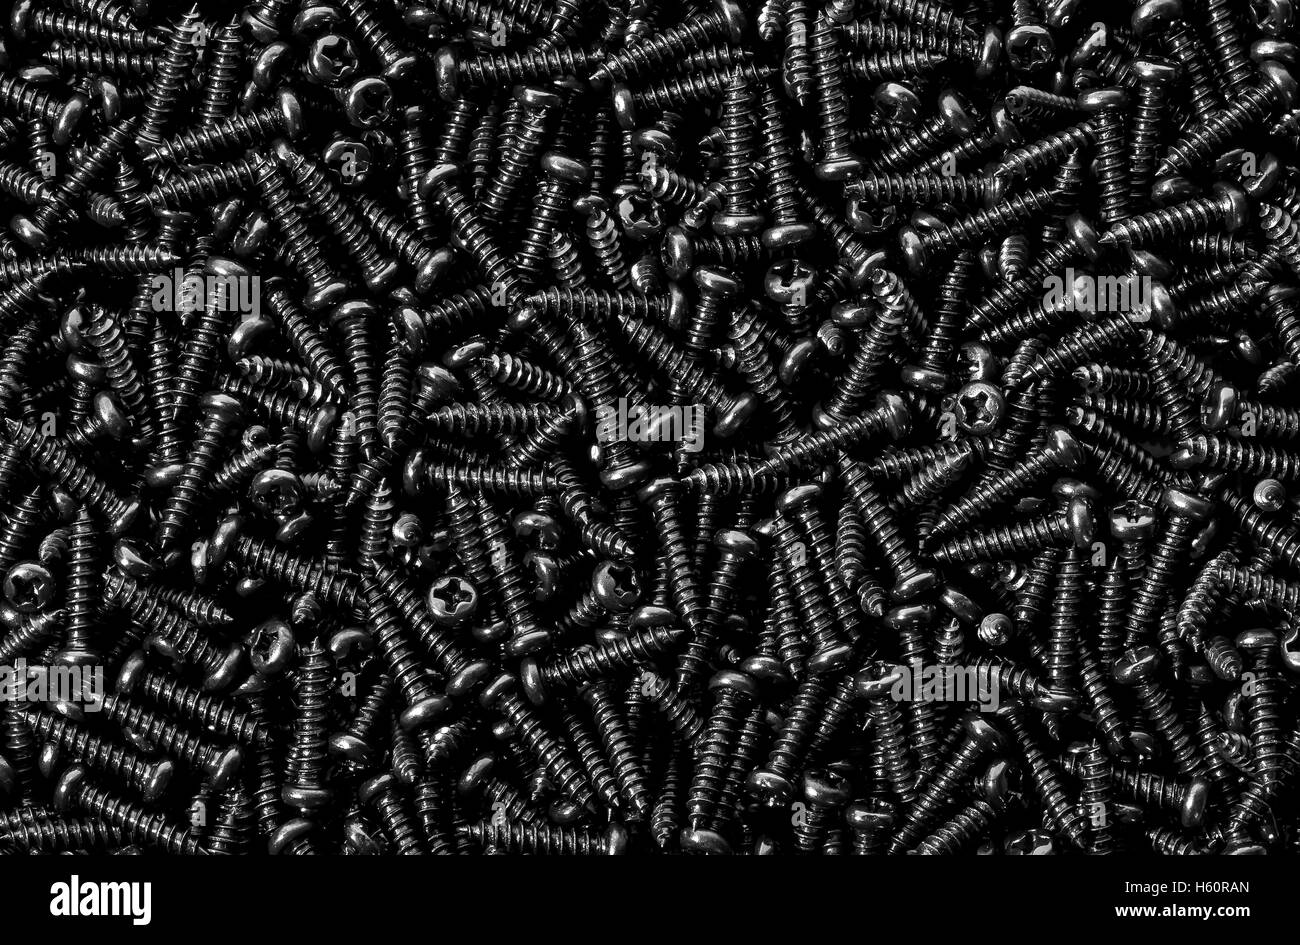 Abstract background pile of shiny black screws Stock Photo